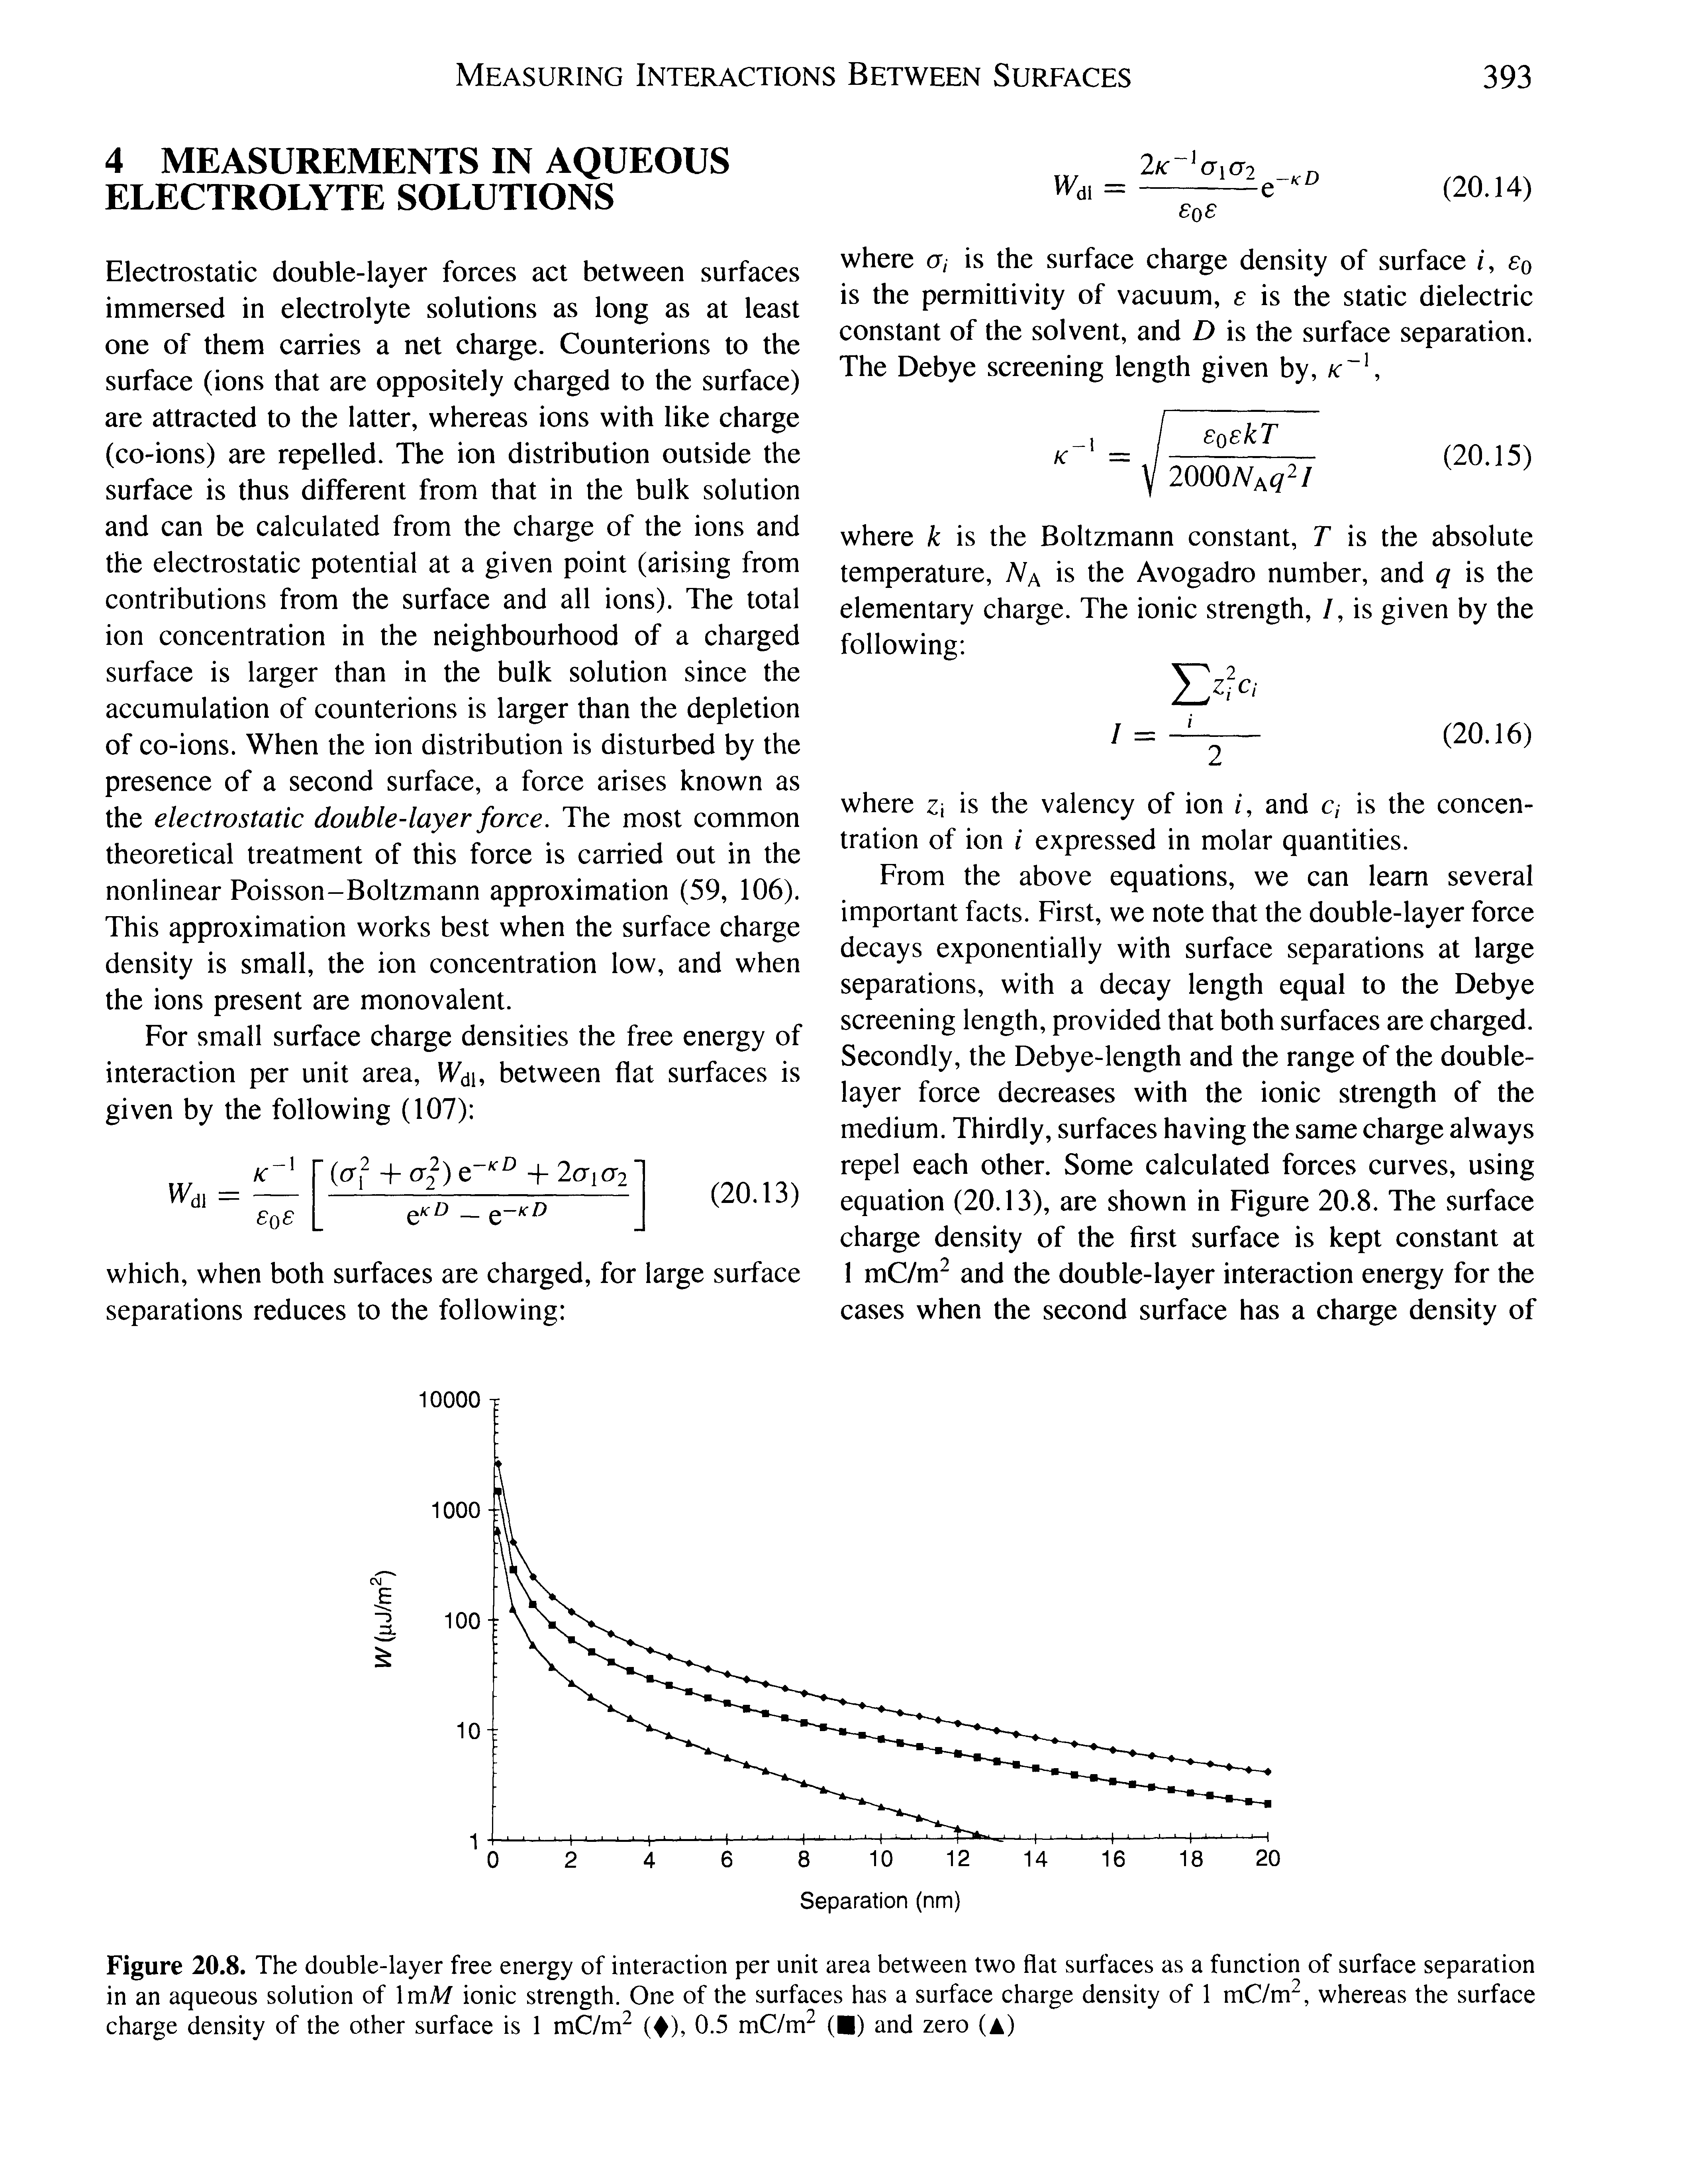 Figure 20.8. The double-layer free energy of interaction per unit area between two flat surfaces as a function of surface separation in an aqueous solution of ImM ionic strength. One of the surfaces has a surface charge density of 1 mClvsr, whereas the surface charge density of the other surface is 1 mC/m ( ), 0.5 mC/m ( ) and zero (A)...